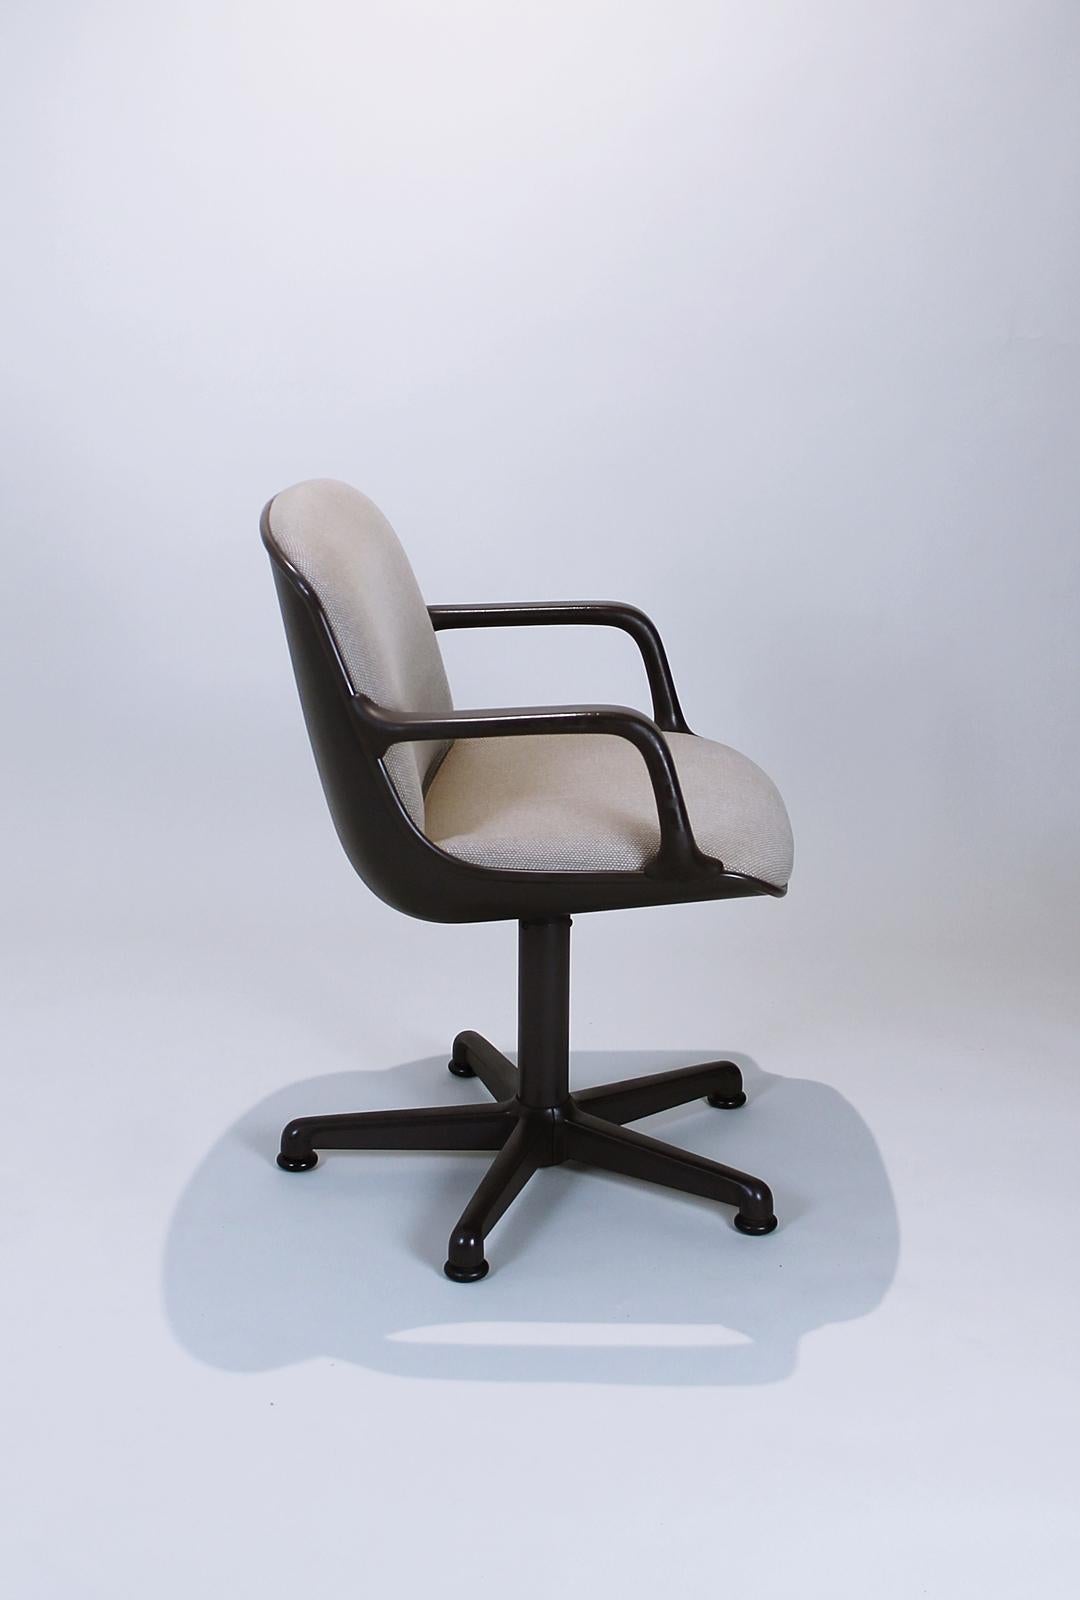 Vintage midcentury executive office chair designed by Charles Pollock and manufactured by Comforto in the 1980s.
It features a hard plastic dark brown colored tub with a sand colored Kvadrat fabric upholstery, brown steel legs and black